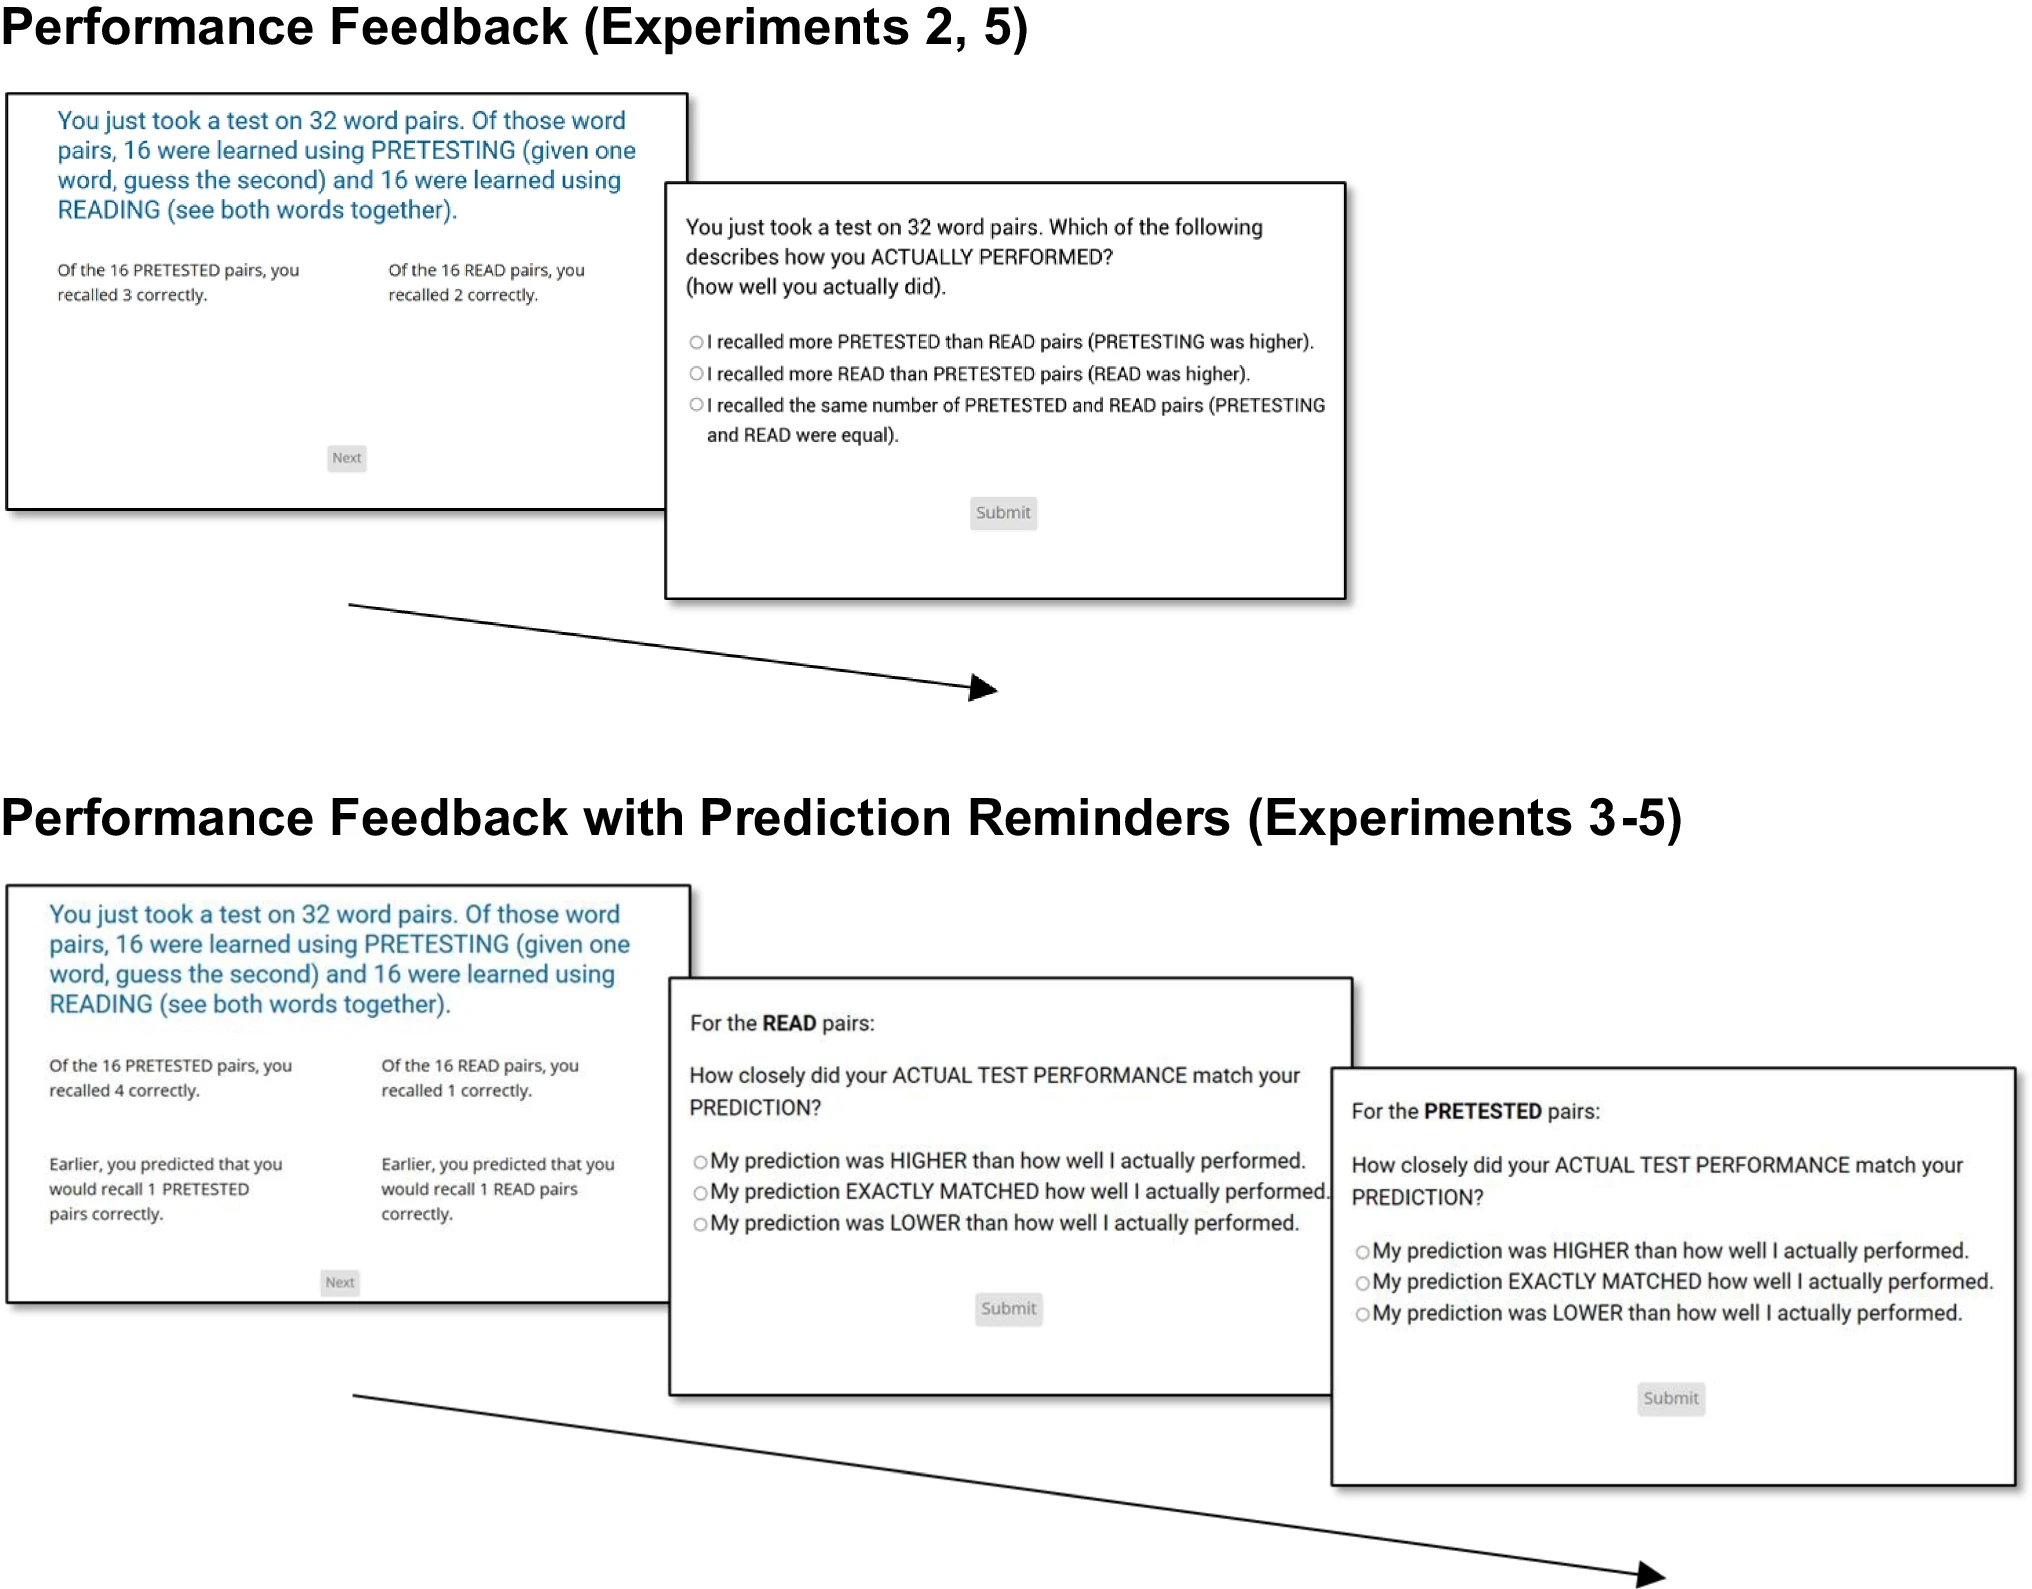 Feedback in Experiments 2–5 and Feedback with prediction reminders in Experiments 3–5.